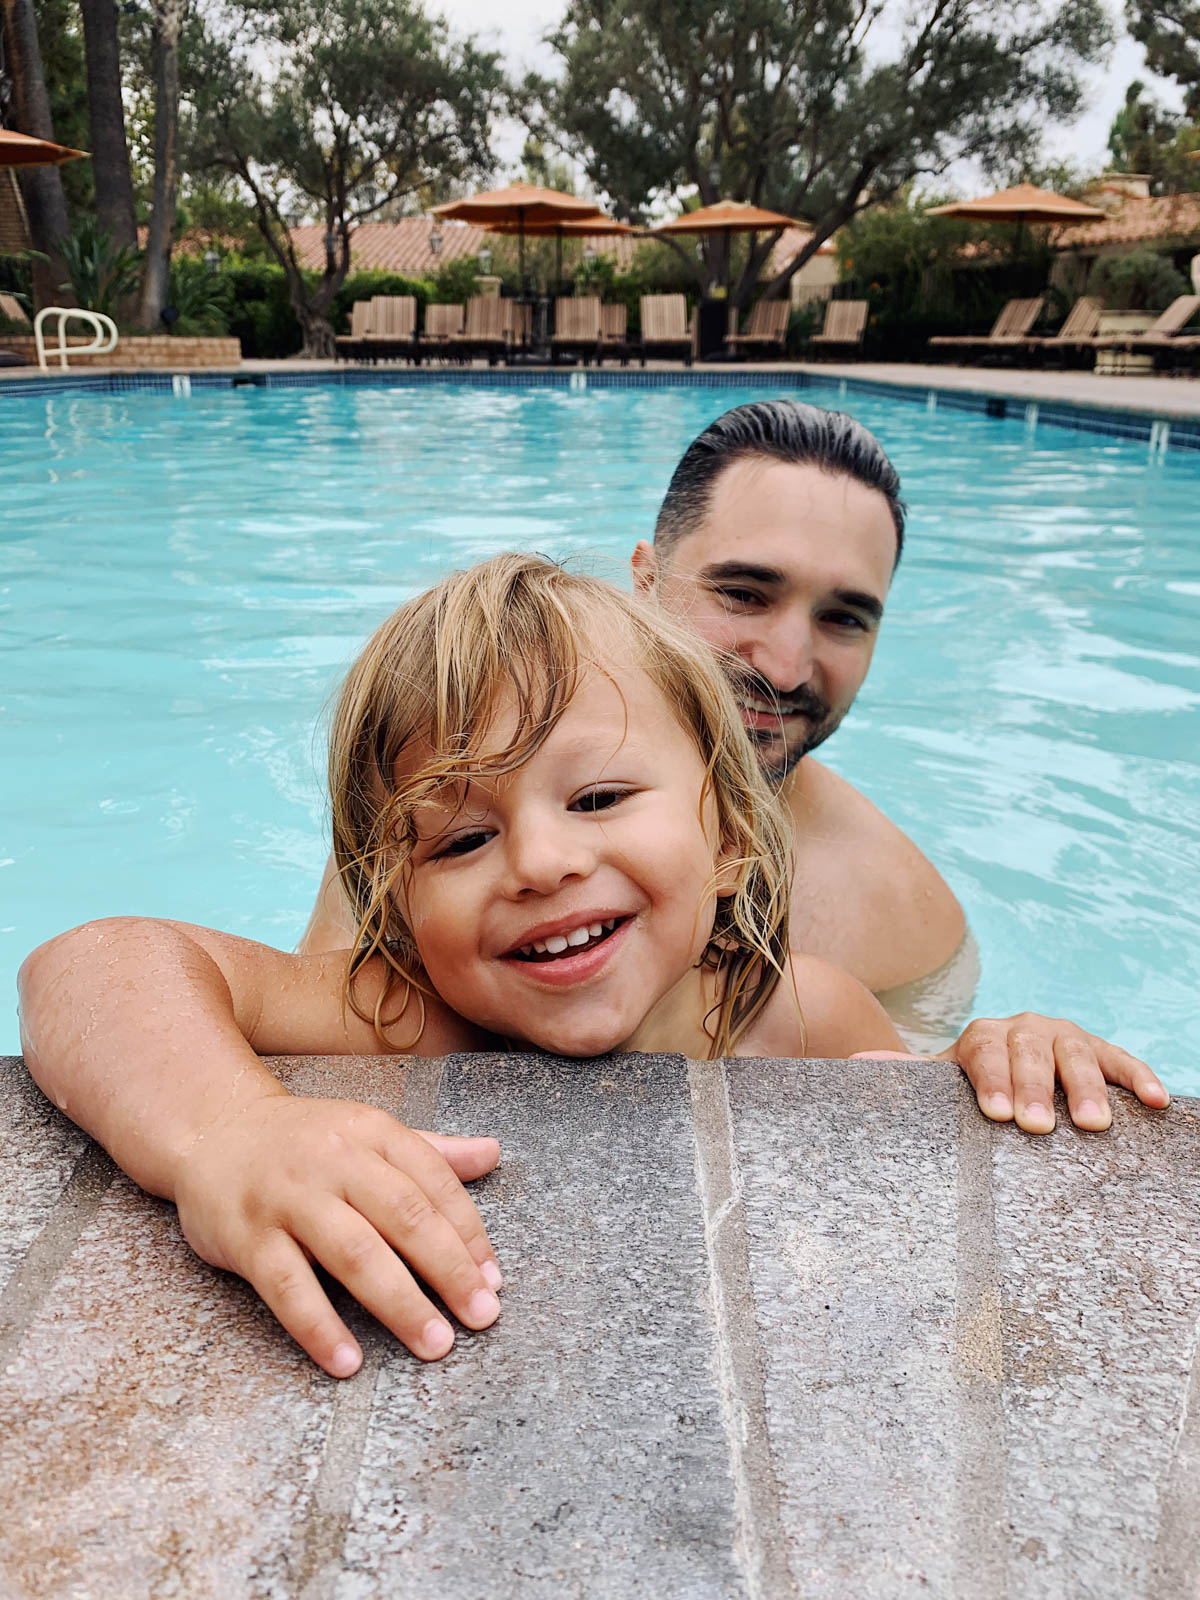 eatsleepwear goes on a family trip with toddler to Rancho Bernardo Inn showing father and son at the pool